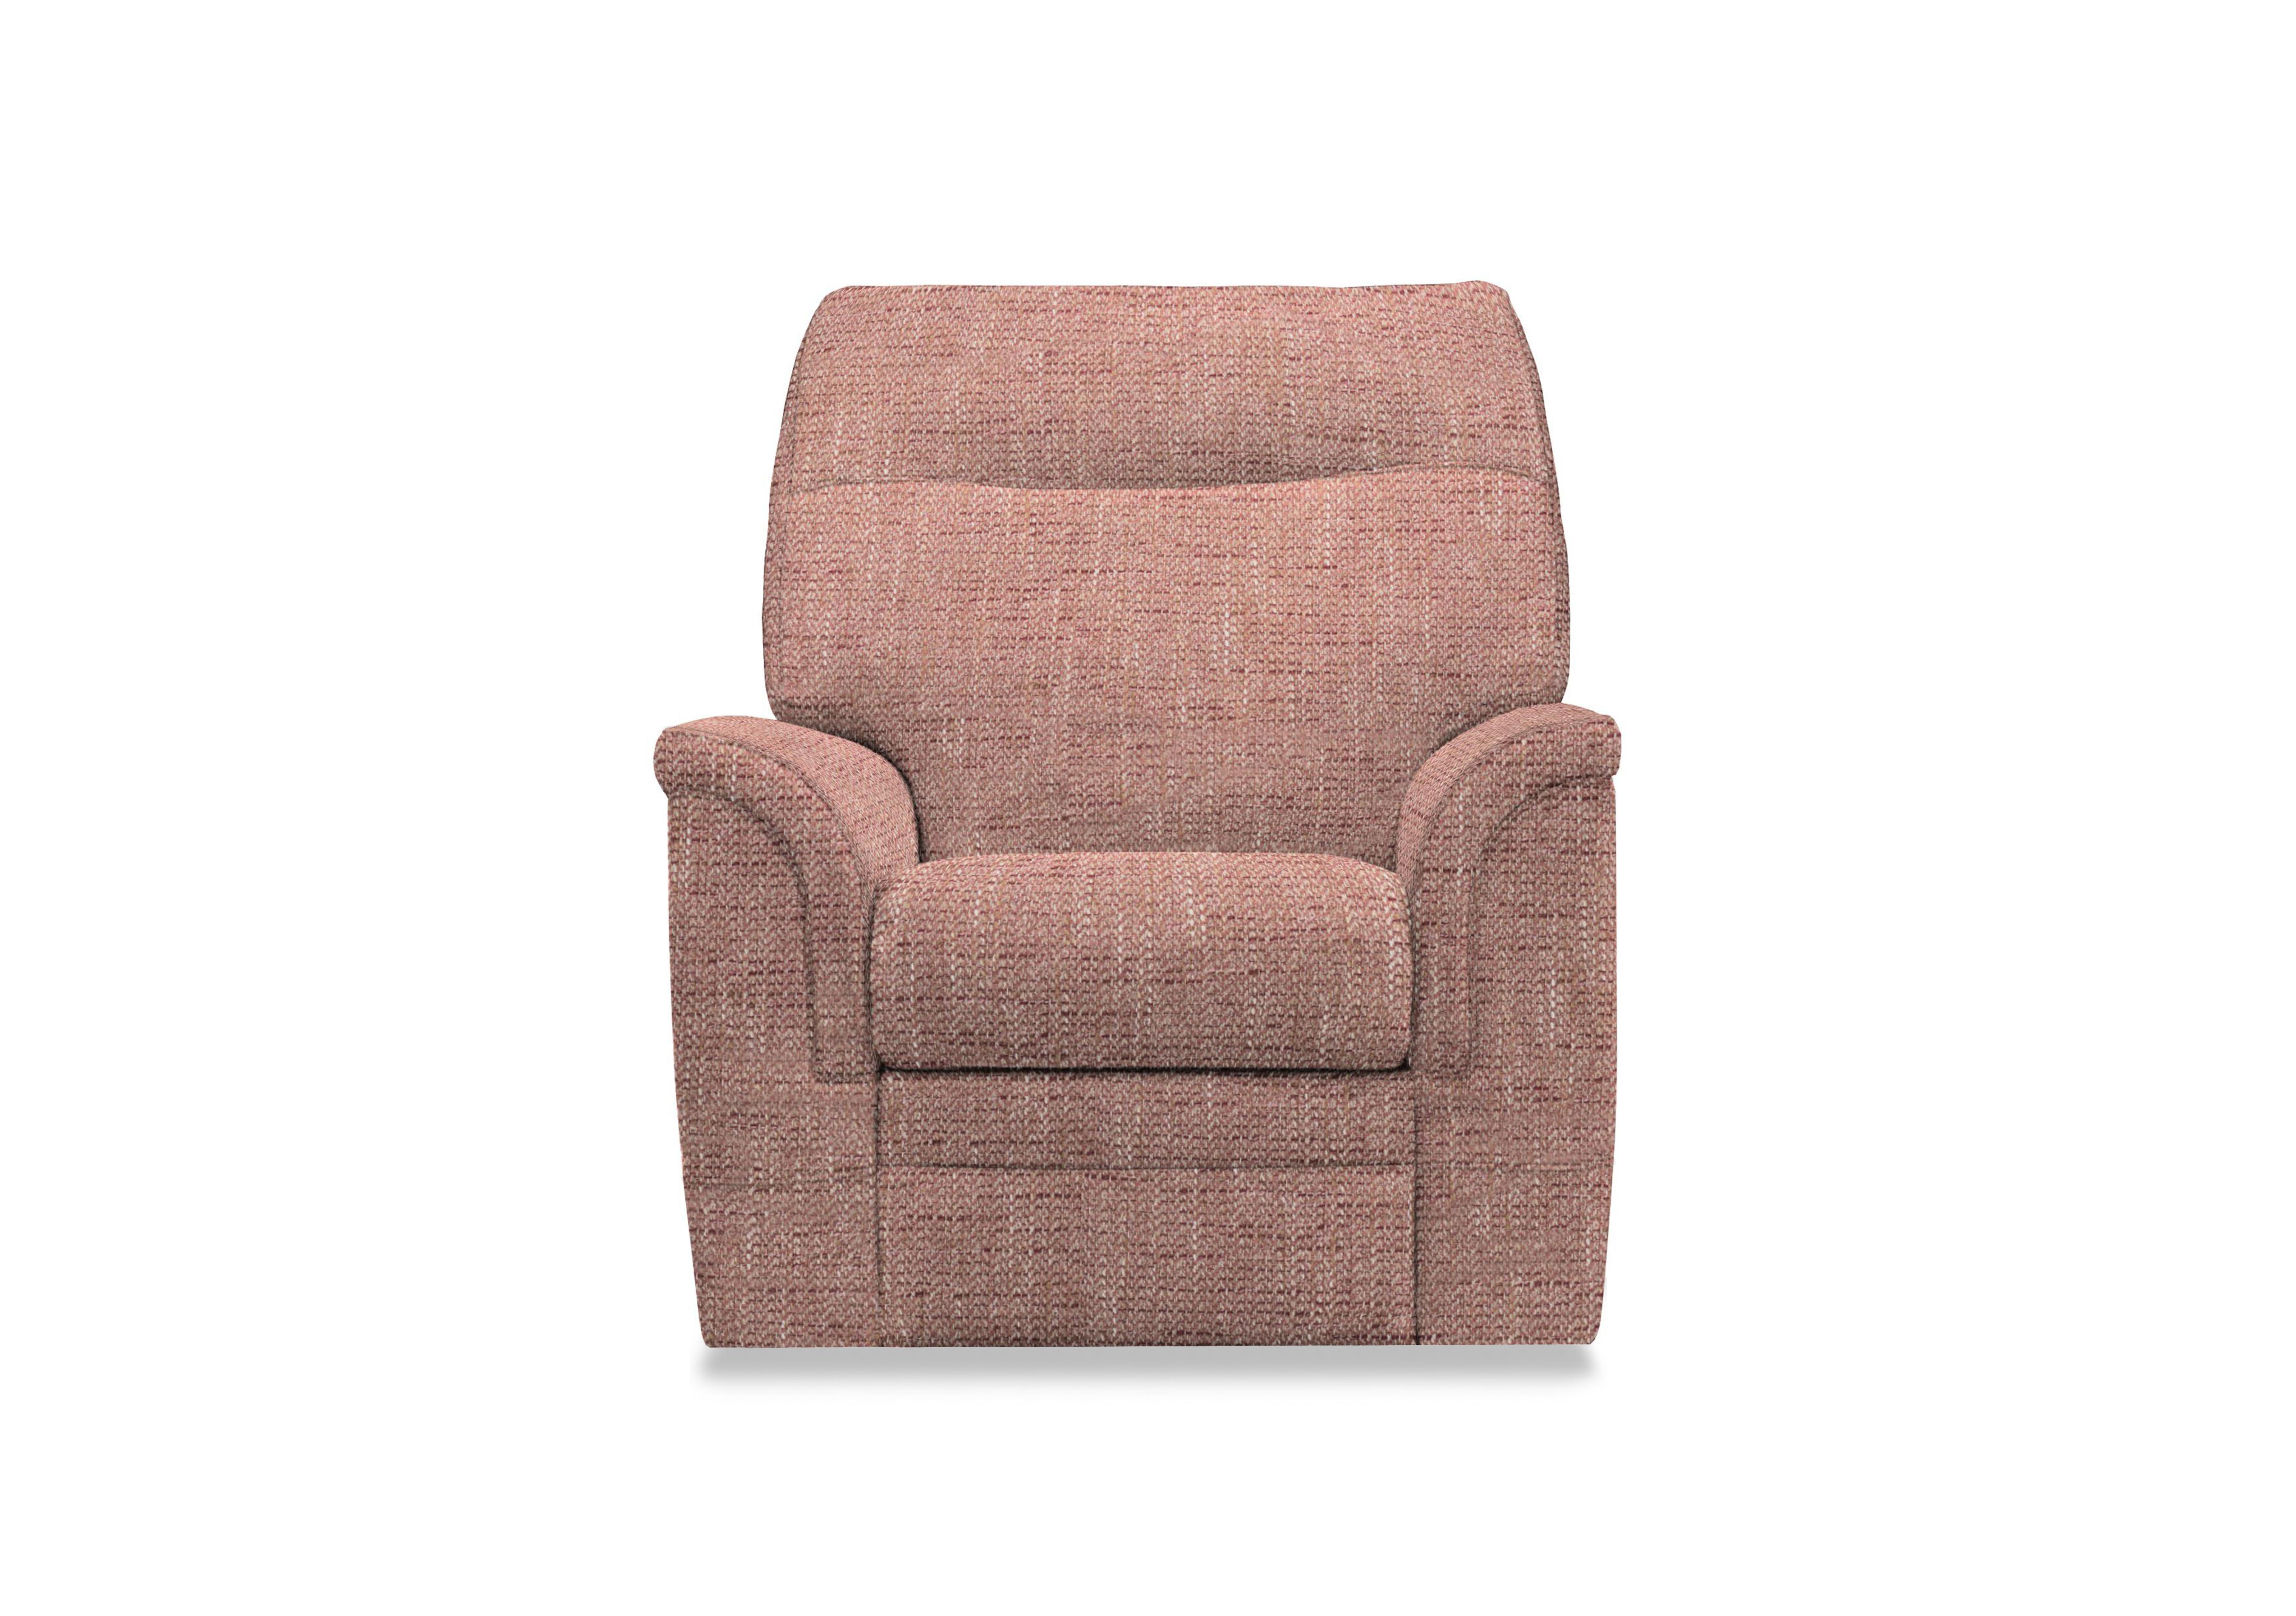 Hudson 23 Fabric Lift and Rise Chair in Country Rose 001409-0003 on Furniture Village